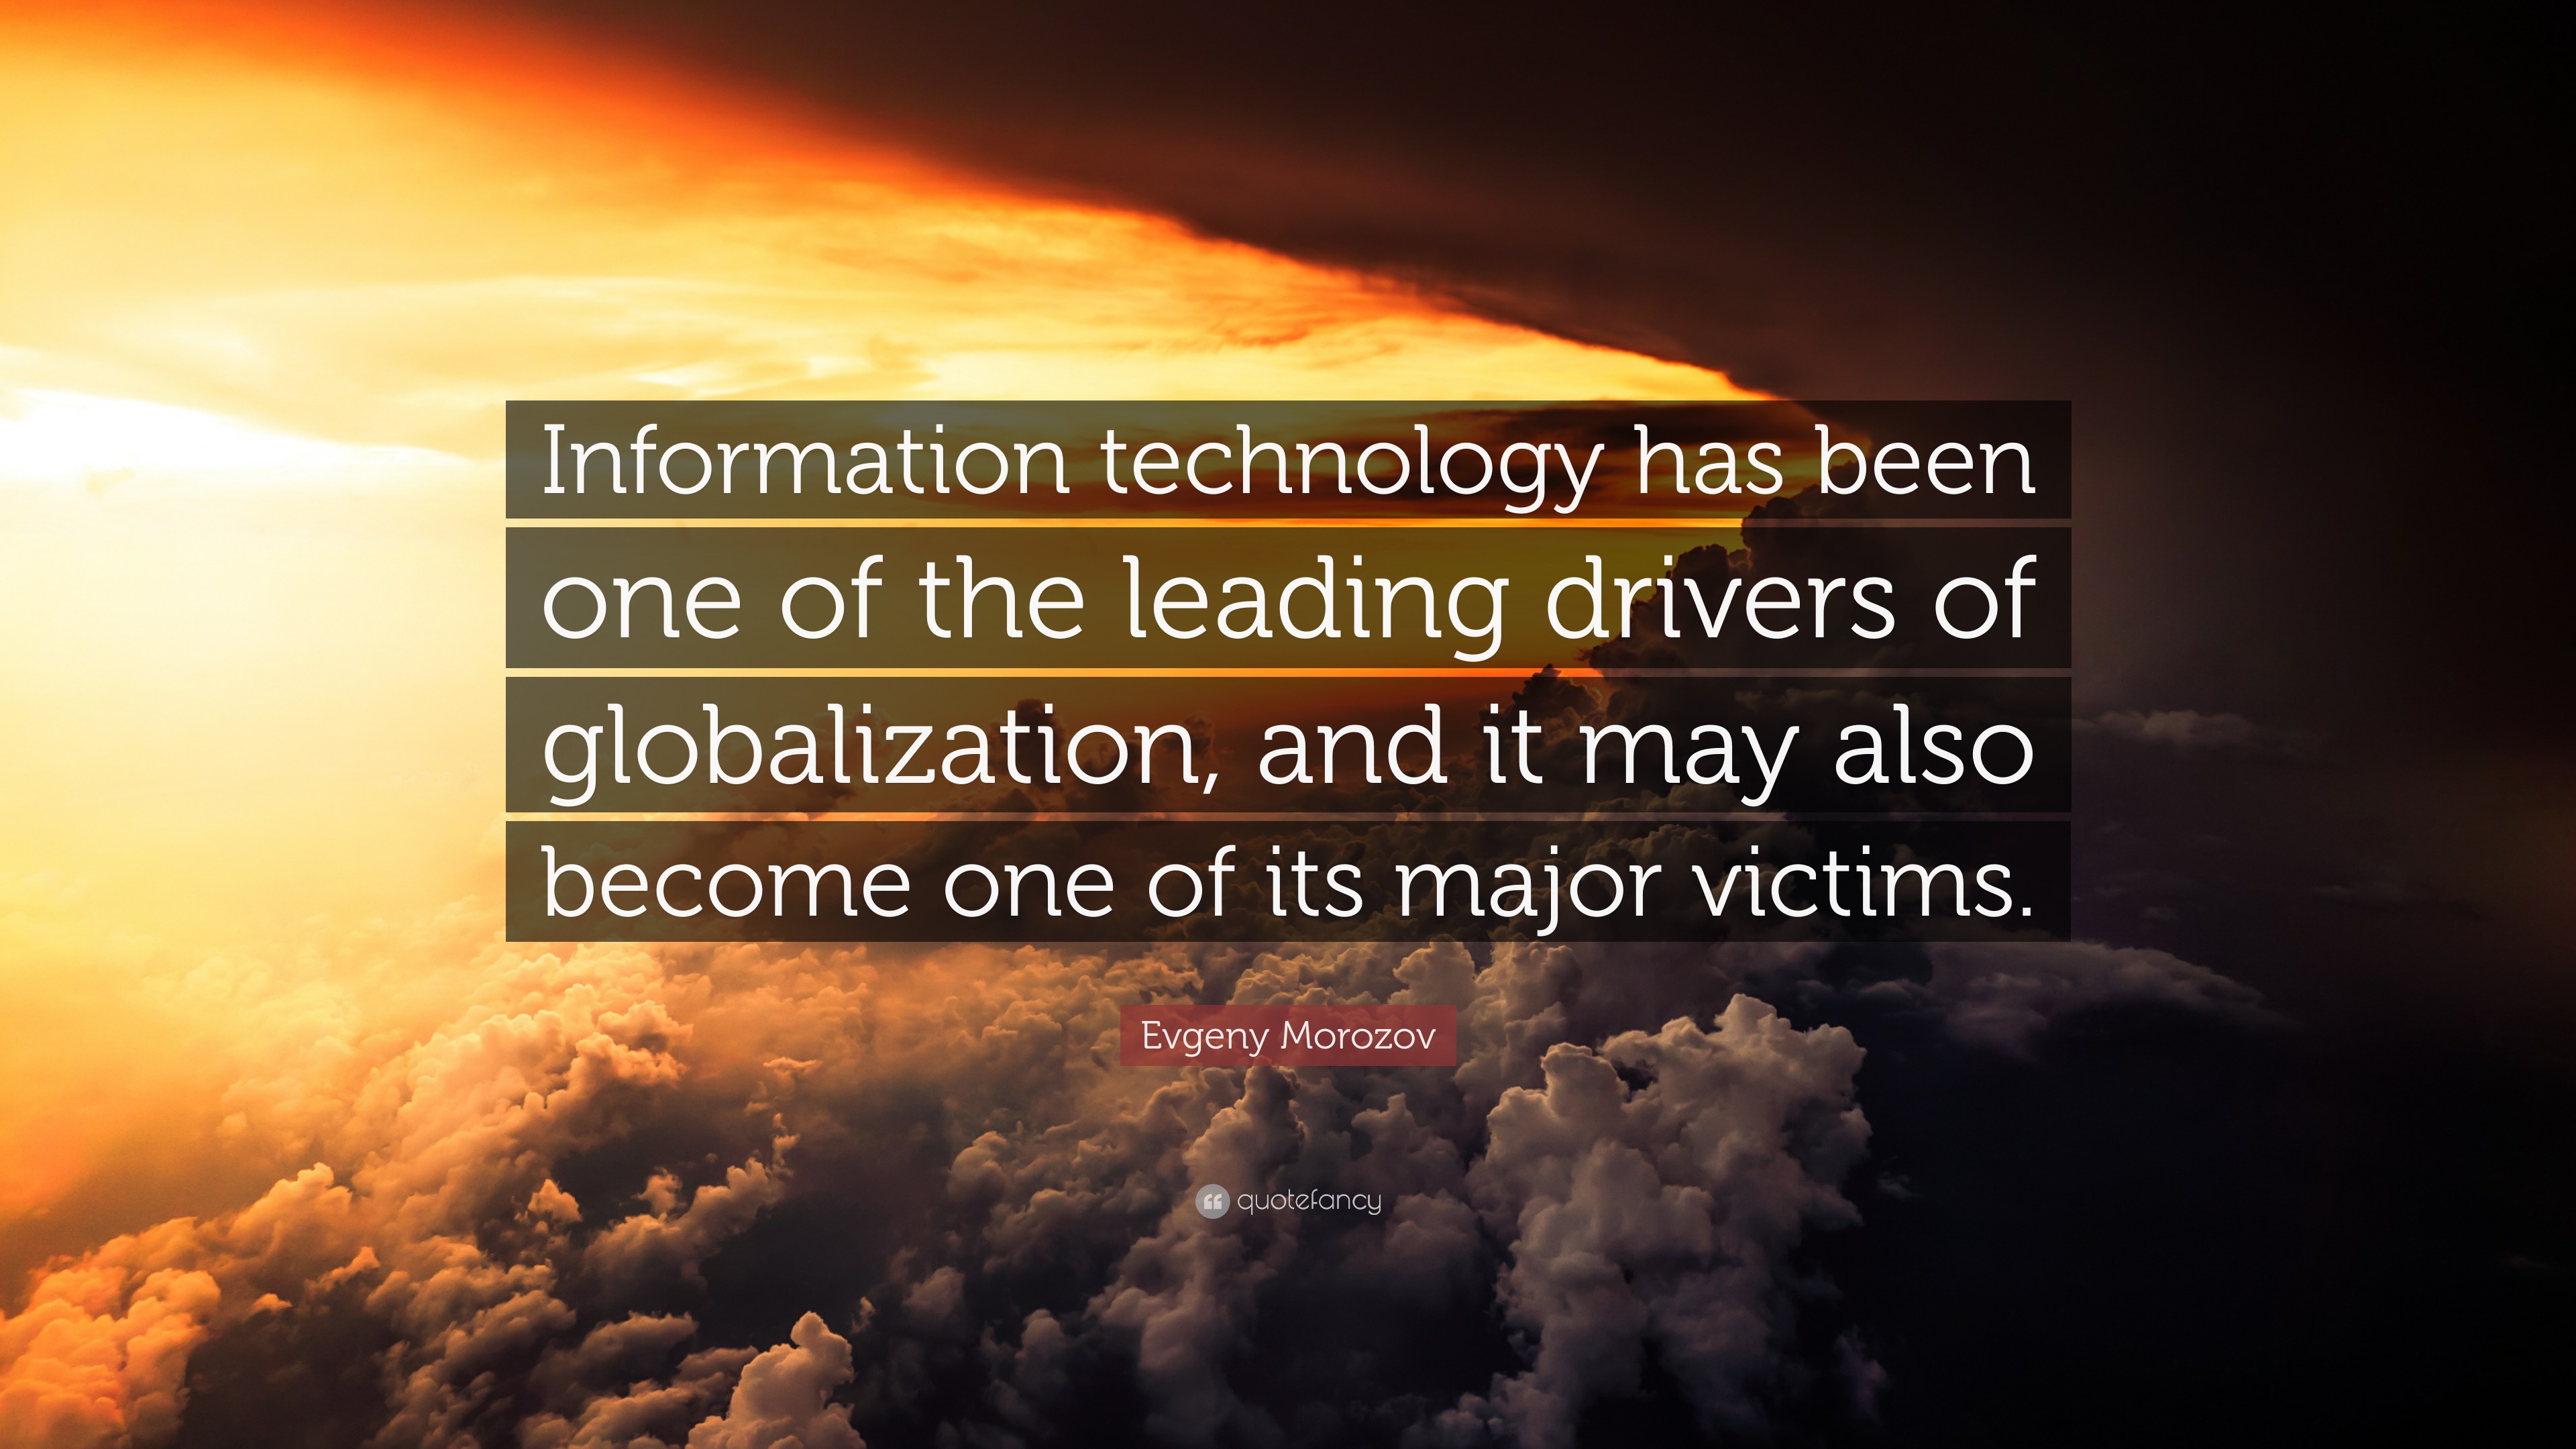 Evgeny Morozov Quote: “Information technology has been one of the